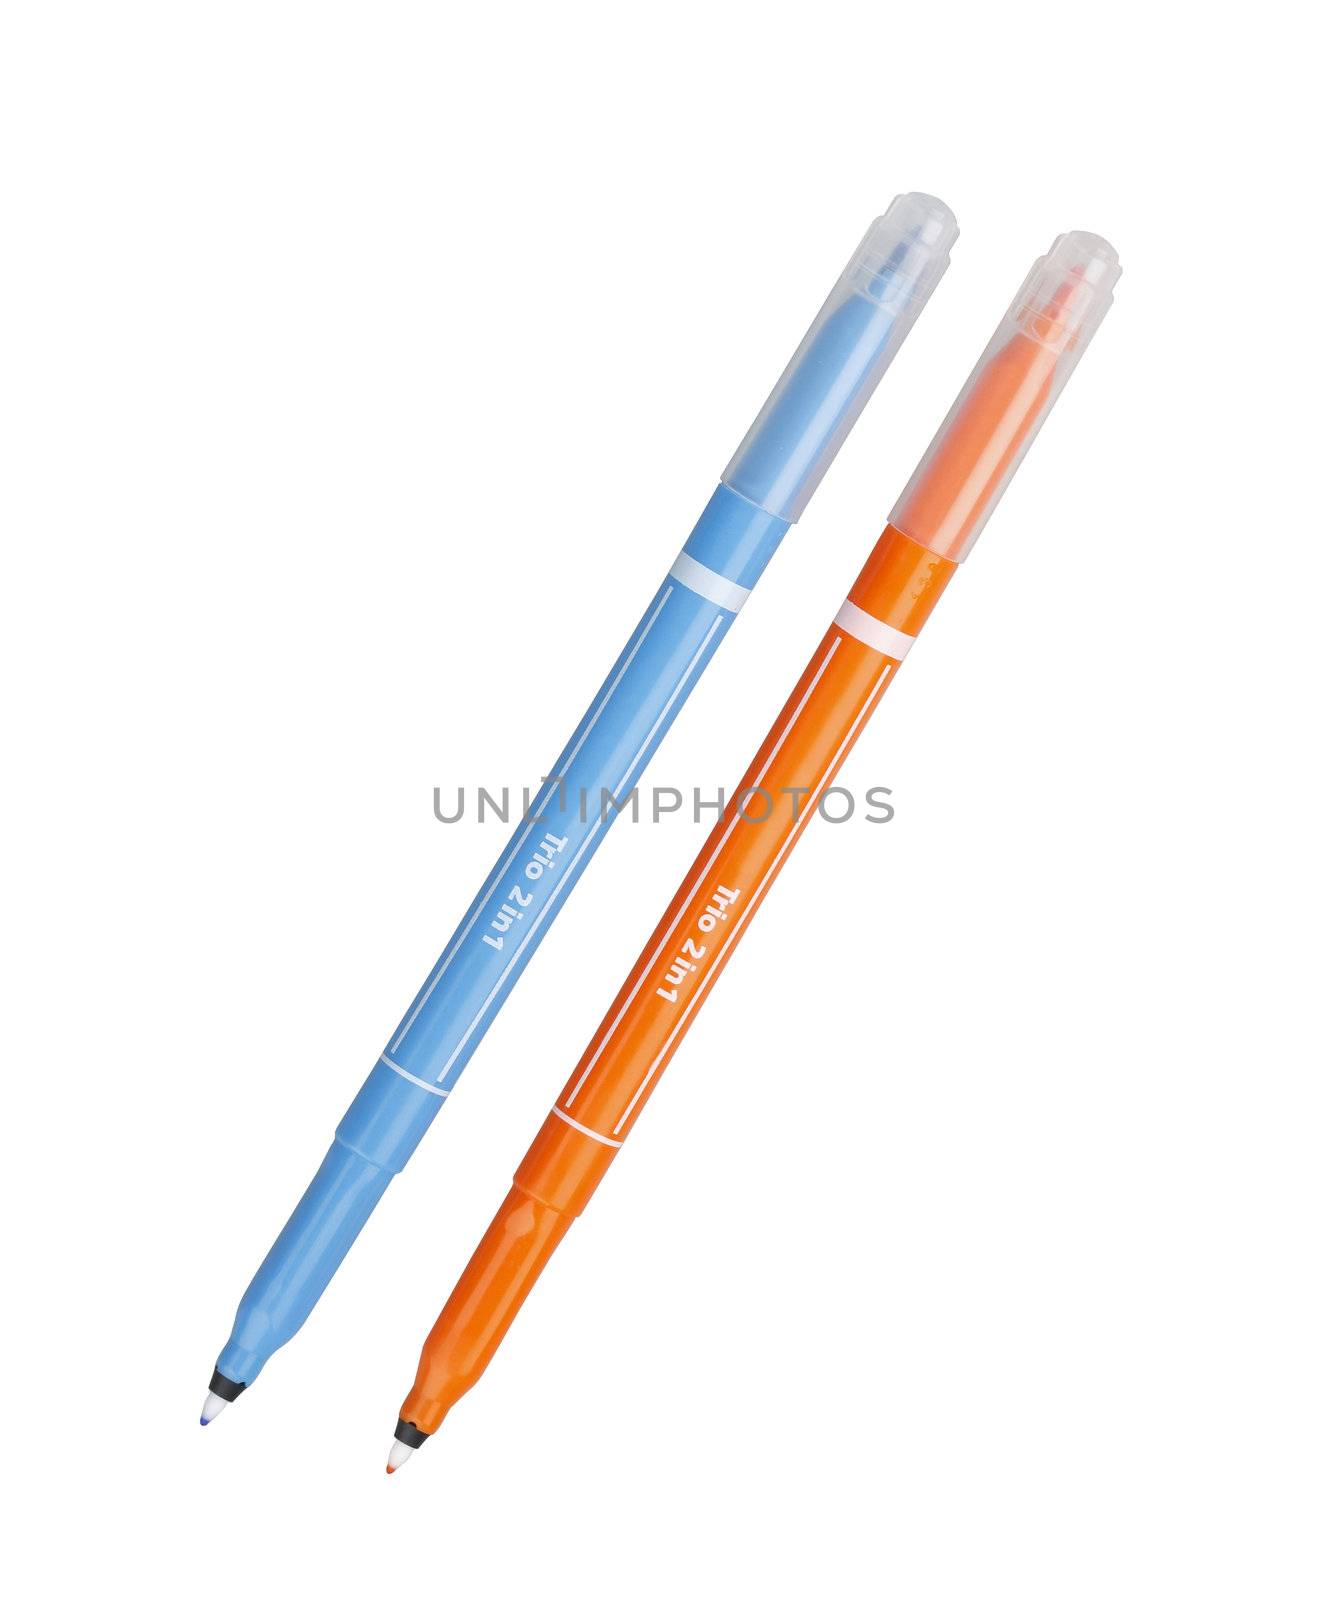 Colorful highlight pen for reminding your important words